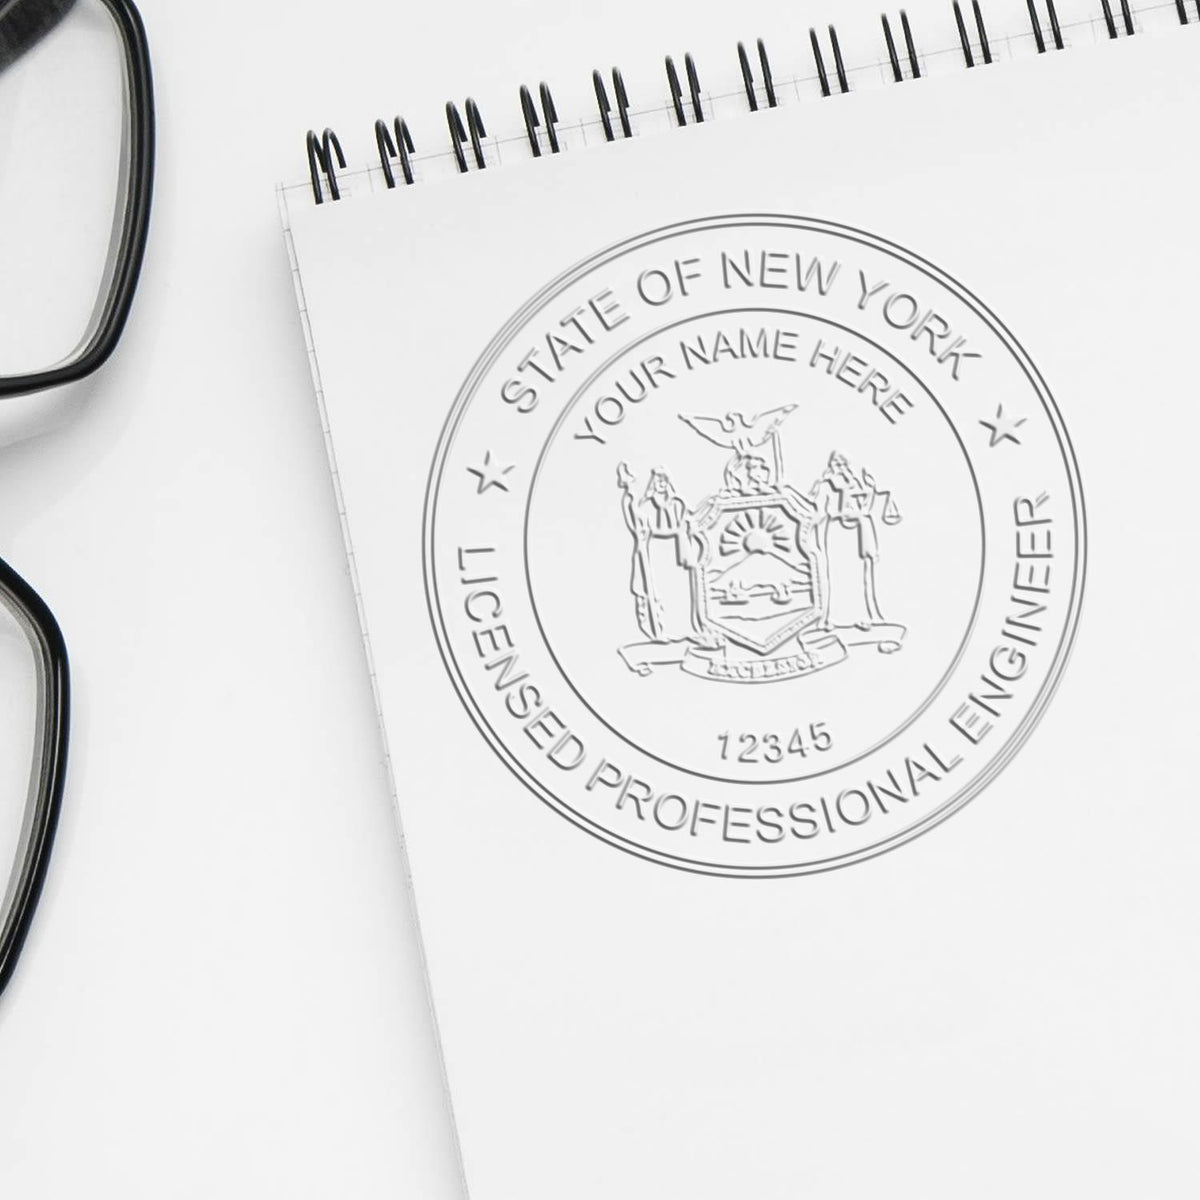 The Heavy Duty Cast Iron New York Engineer Seal Embosser stamp impression comes to life with a crisp, detailed photo on paper - showcasing true professional quality.